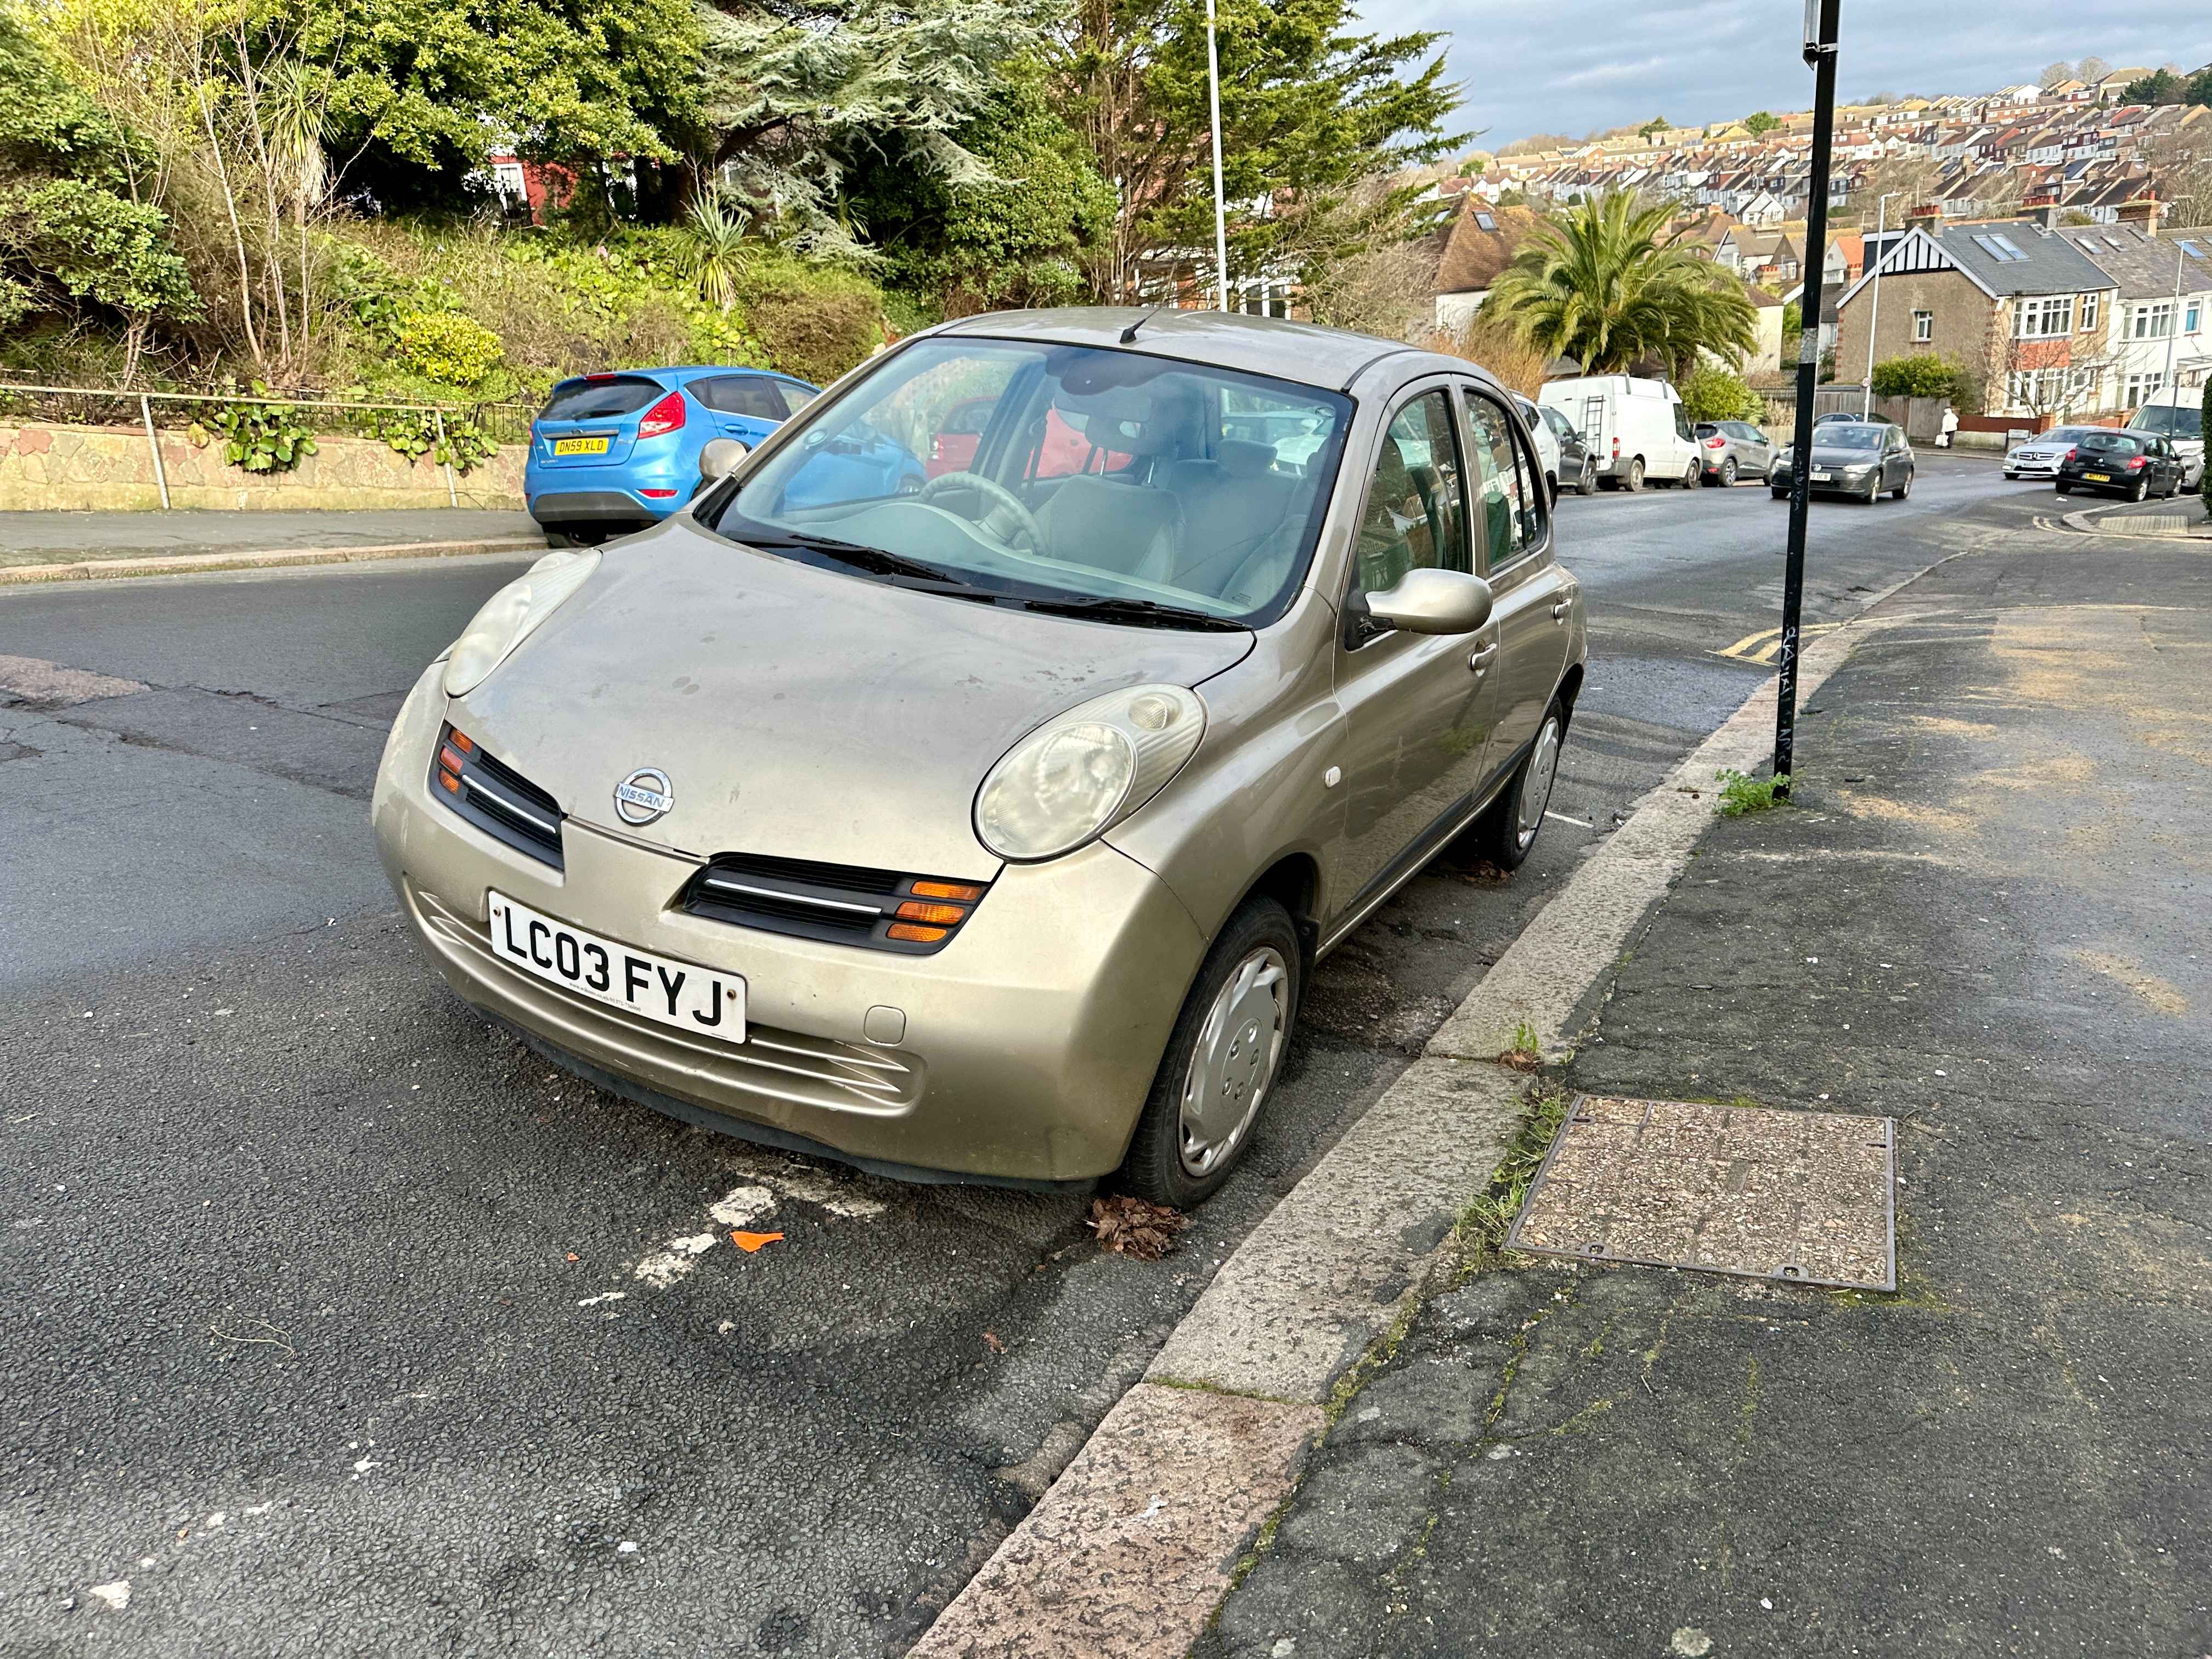 Photograph of LC03 FYJ - a Gold Nissan Micra parked in Hollingdean by a non-resident, and potentially abandoned. The twelfth of seventeen photographs supplied by the residents of Hollingdean.